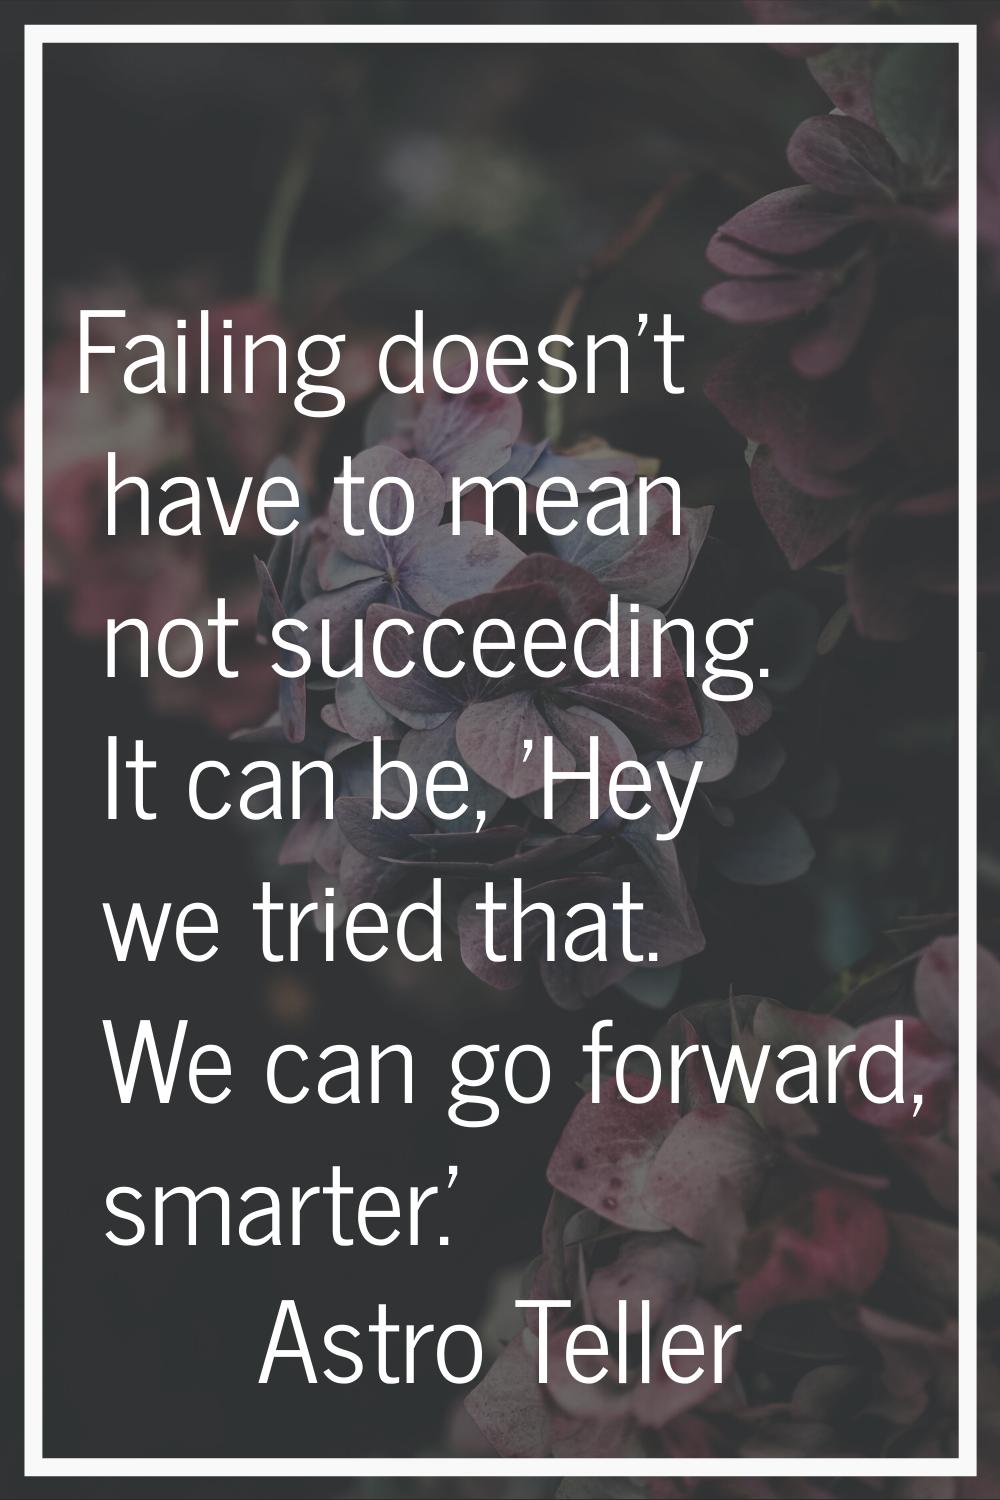 Failing doesn't have to mean not succeeding. It can be, 'Hey we tried that. We can go forward, smar